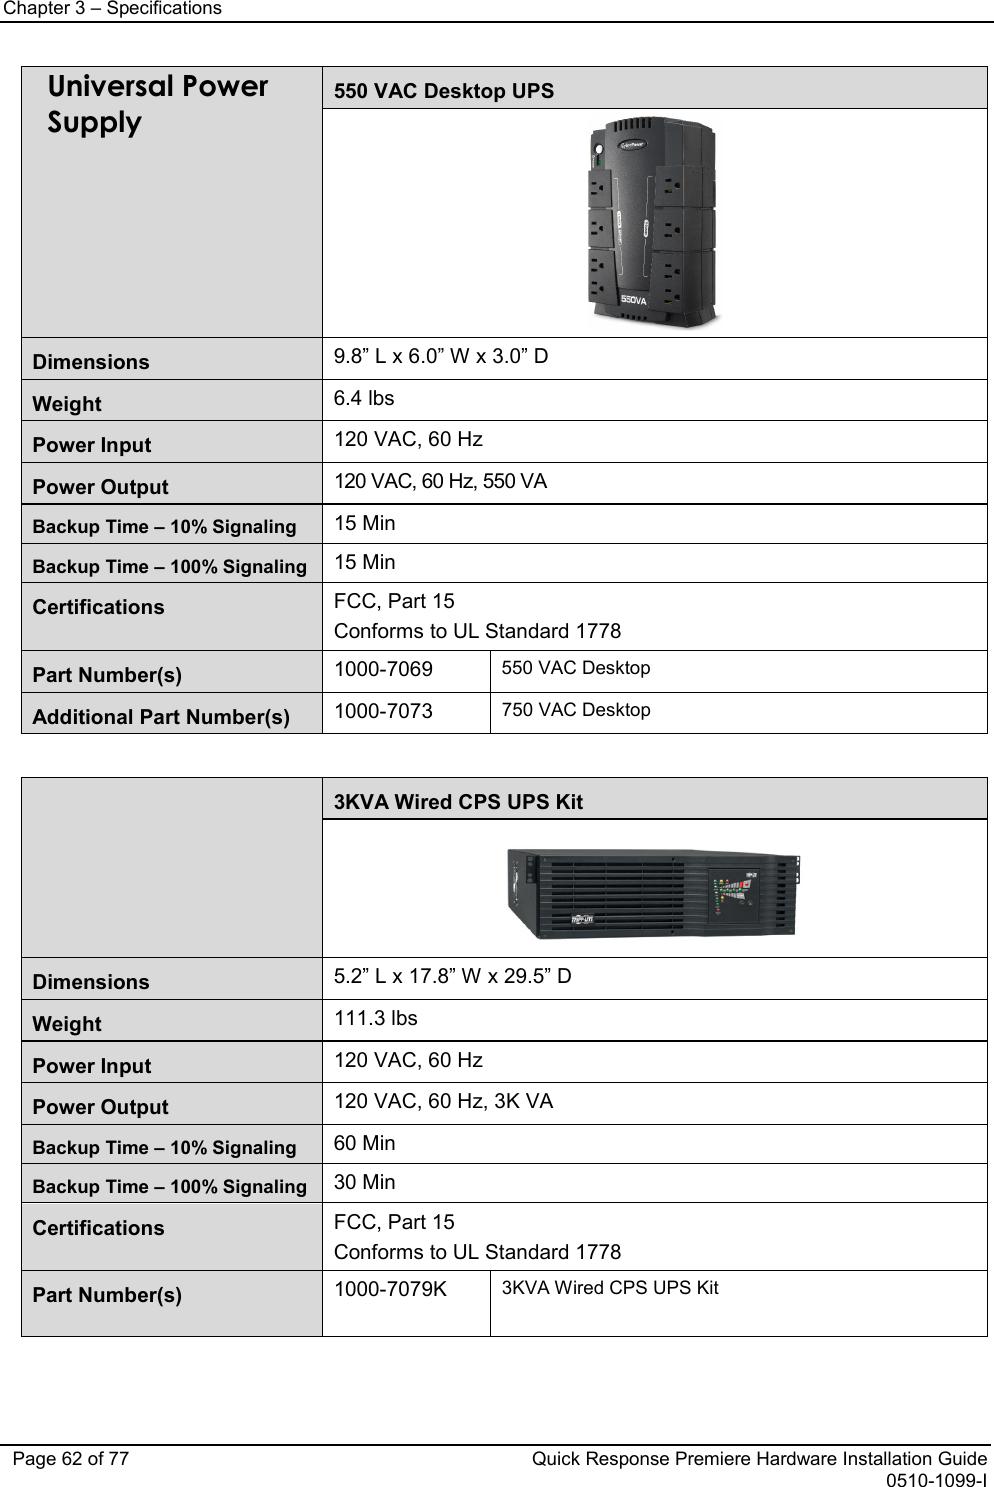 Chapter 3 – Specifications   Page 62 of 77 Quick Response Premiere Hardware Installation Guide 0510-1099-I Universal Power Supply 550 VAC Desktop UPS  Dimensions  9.8” L x 6.0” W x 3.0” D Weight 6.4 lbs Power Input 120 VAC, 60 Hz Power Output 120 VAC, 60 Hz, 550 VA Backup Time – 10% Signaling 15 Min Backup Time – 100% Signaling 15 Min Certifications FCC, Part 15 Conforms to UL Standard 1778 Part Number(s)  1000-7069  550 VAC Desktop Additional Part Number(s) 1000-7073  750 VAC Desktop      3KVA Wired CPS UPS Kit  Dimensions  5.2” L x 17.8” W x 29.5” D Weight 111.3 lbs Power Input 120 VAC, 60 Hz Power Output 120 VAC, 60 Hz, 3K VA Backup Time – 10% Signaling 60 Min Backup Time – 100% Signaling 30 Min Certifications FCC, Part 15 Conforms to UL Standard 1778 Part Number(s)  1000-7079K   3KVA Wired CPS UPS Kit     